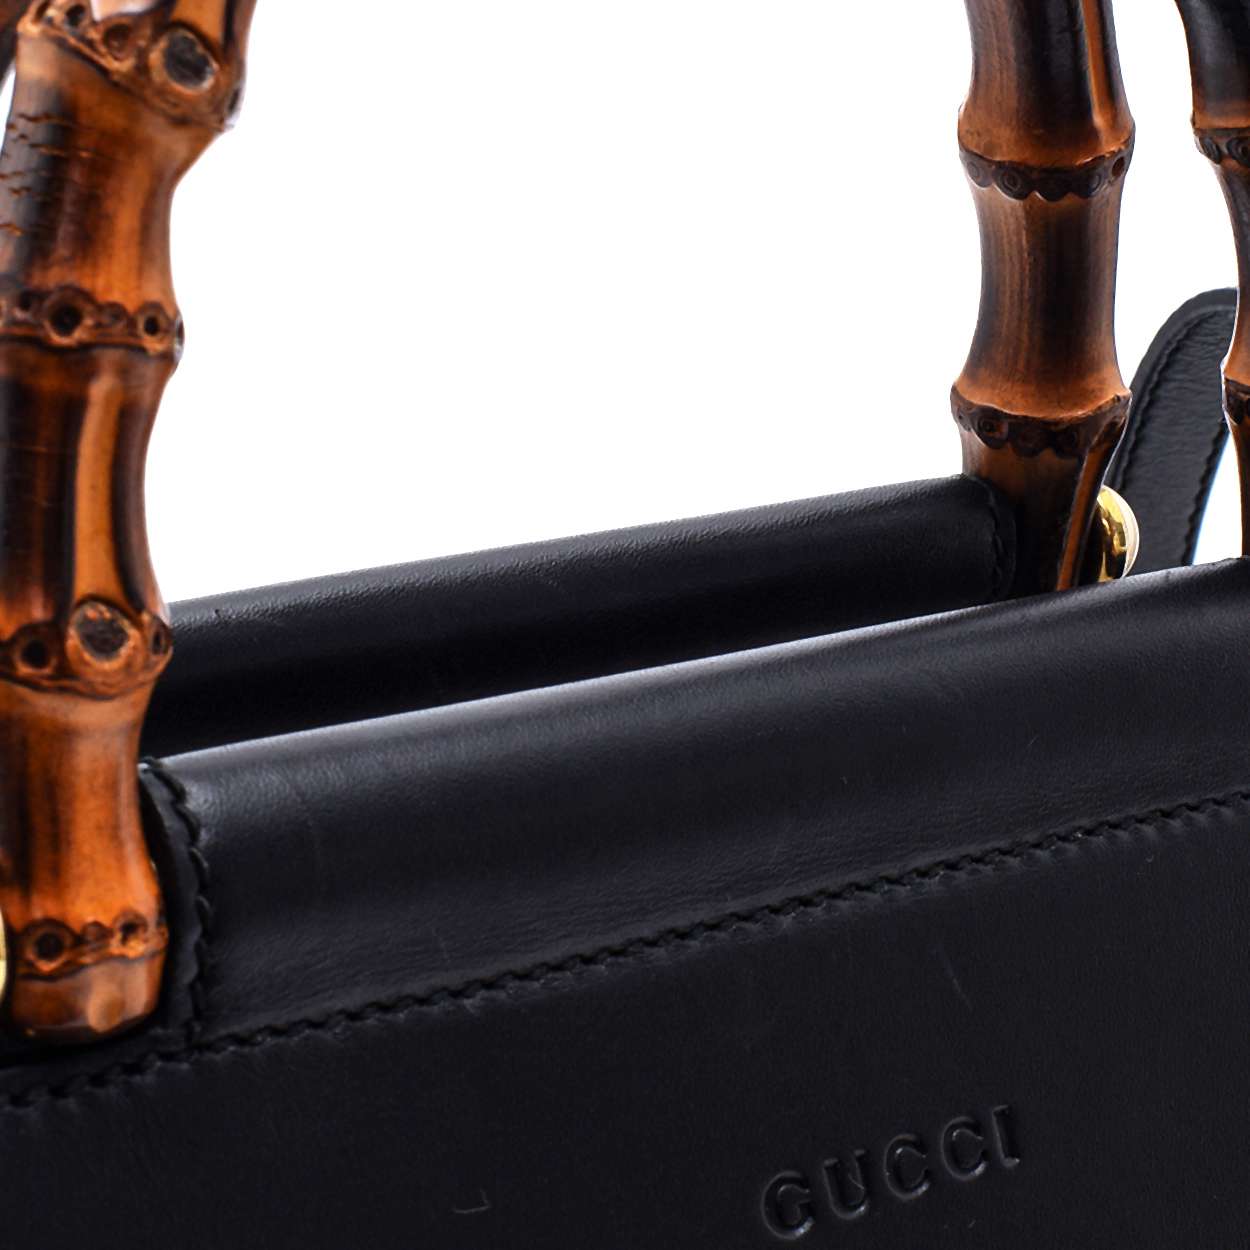 Gucci - Black Bamboo Nymphaea Leather Tote Bag 